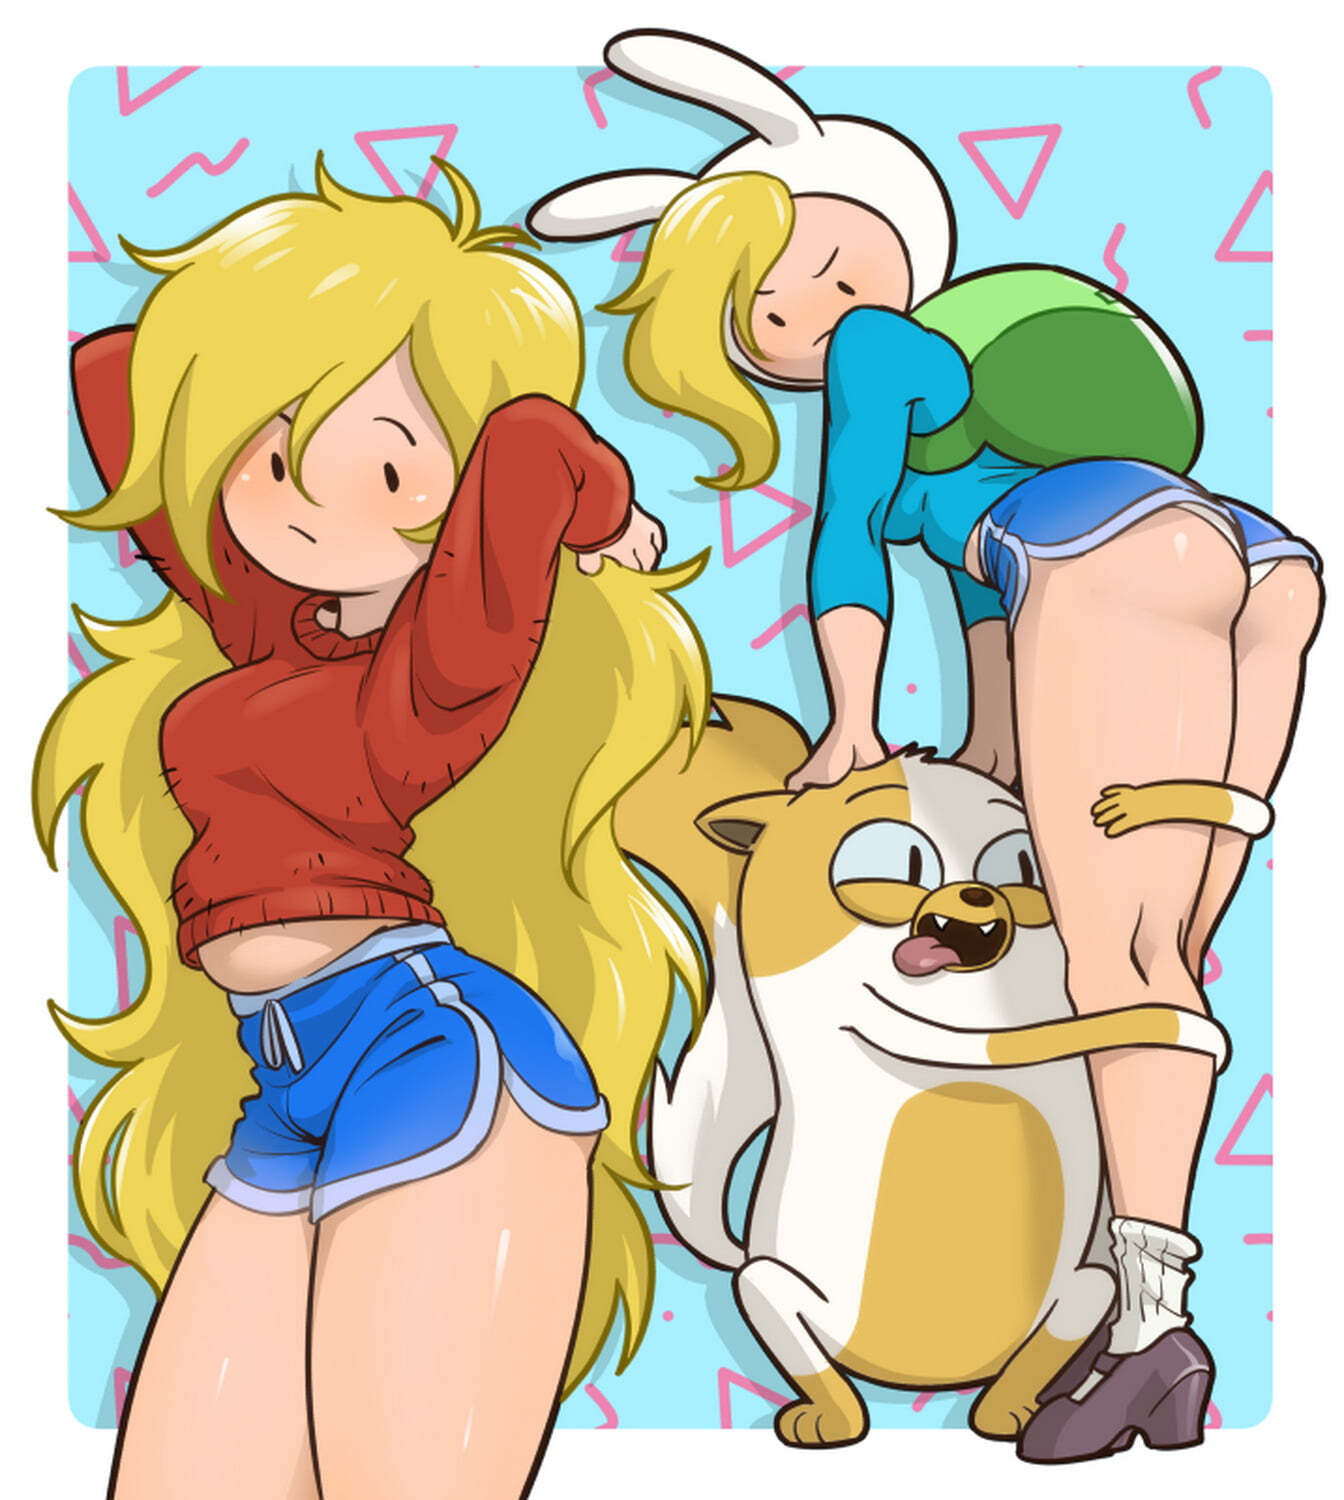 Human Cake Adventure Time Lesbian Porn - Cake The Cat and Fionna The Human Girl Blonde Thicc > Your Cartoon Porn